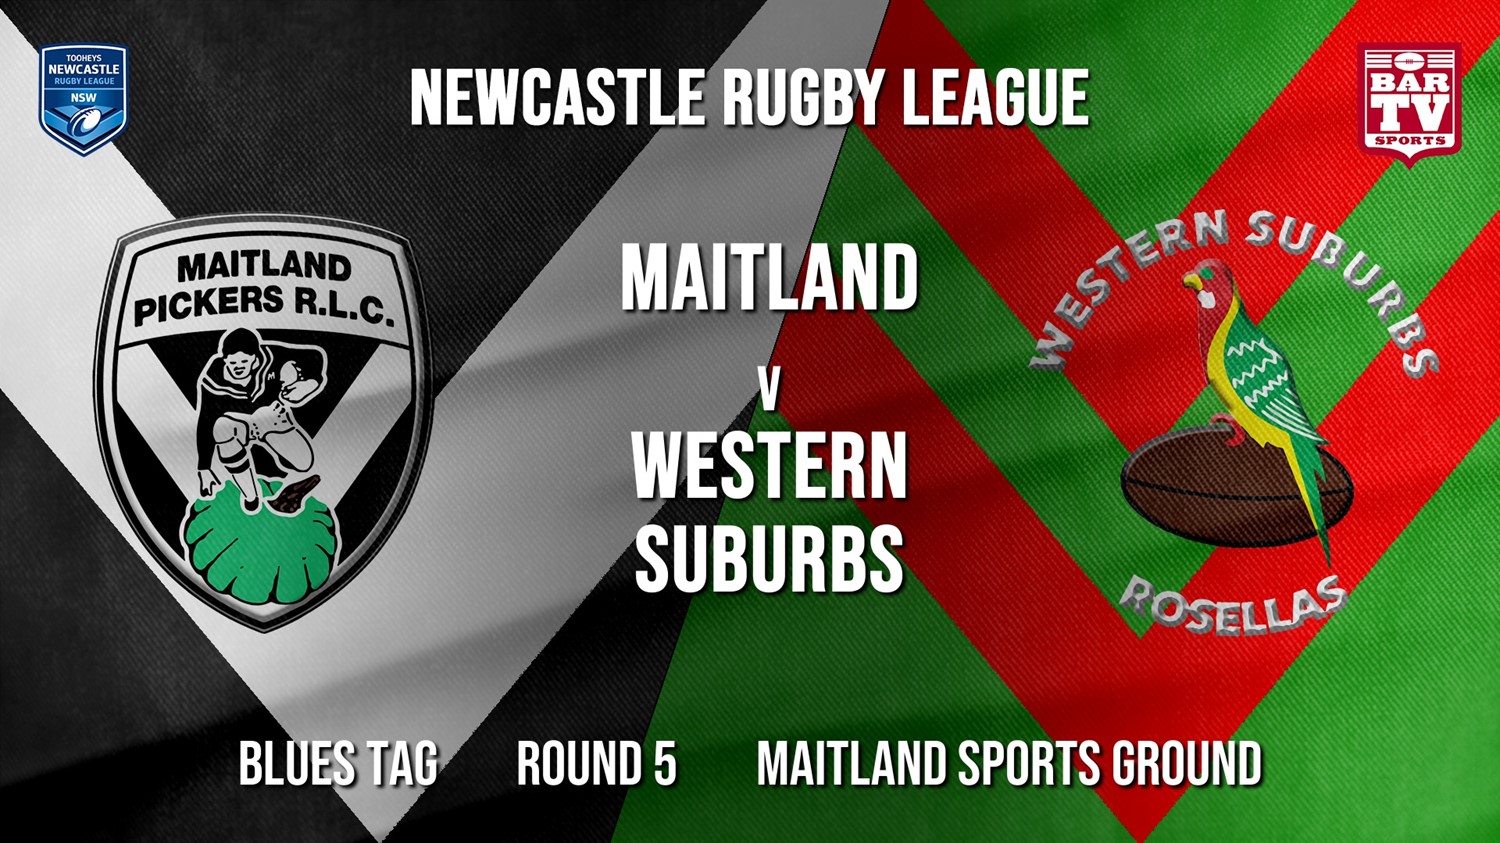 Newcastle Rugby League Round 5 - Blues Tag - Maitland Pickers v Western Suburbs Rosellas Slate Image